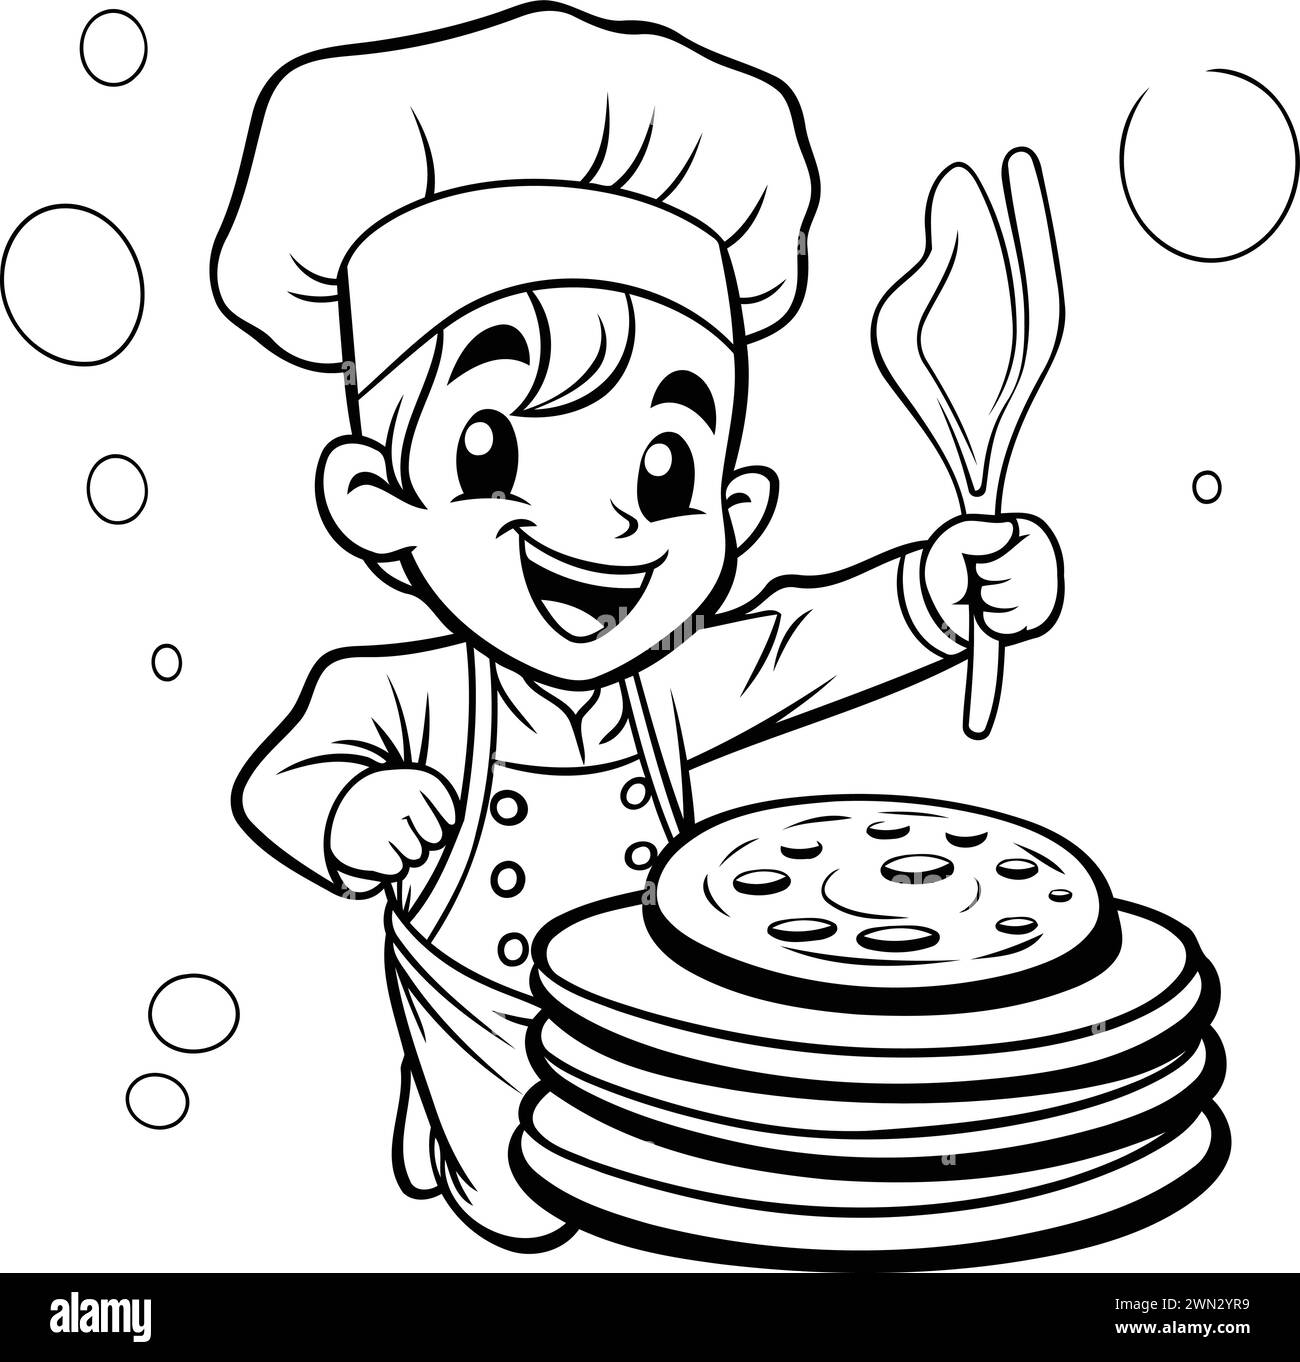 Black and White Cartoon Illustration of Little Boy Chef with Stack of Pancakes for Coloring Book Stock Vector